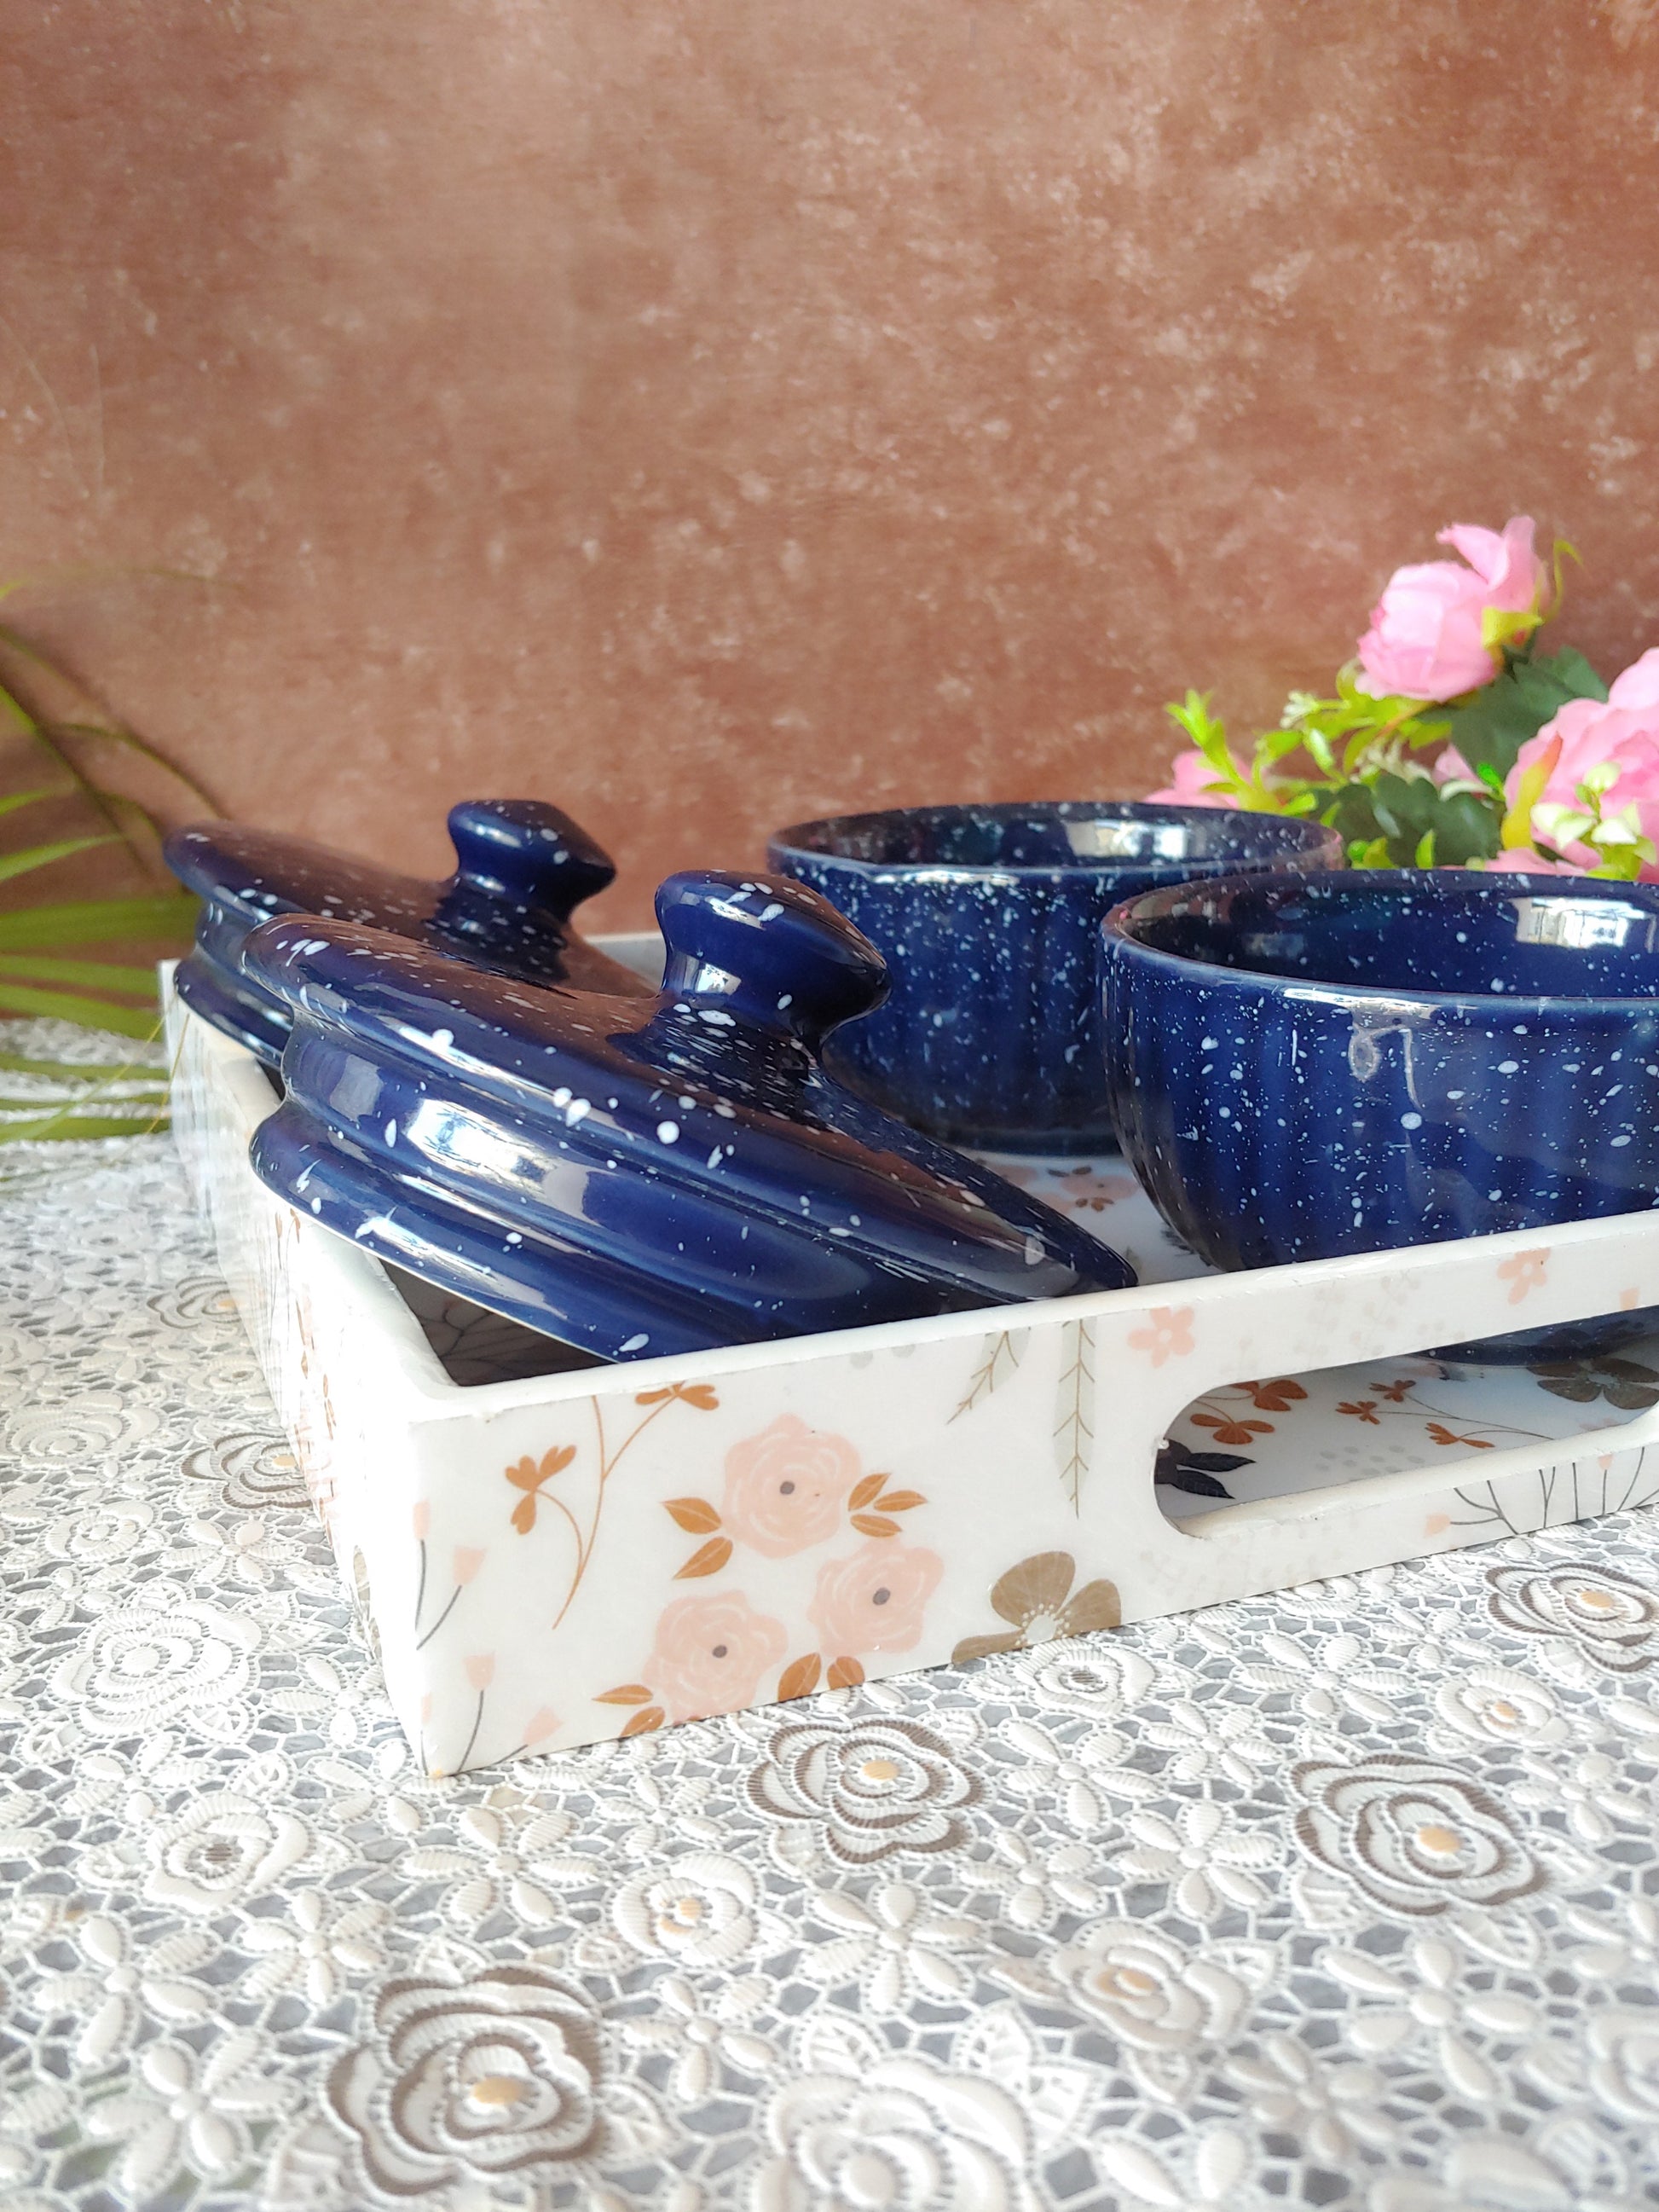 Blue Ceramic Decorative bowls with Lid Tray